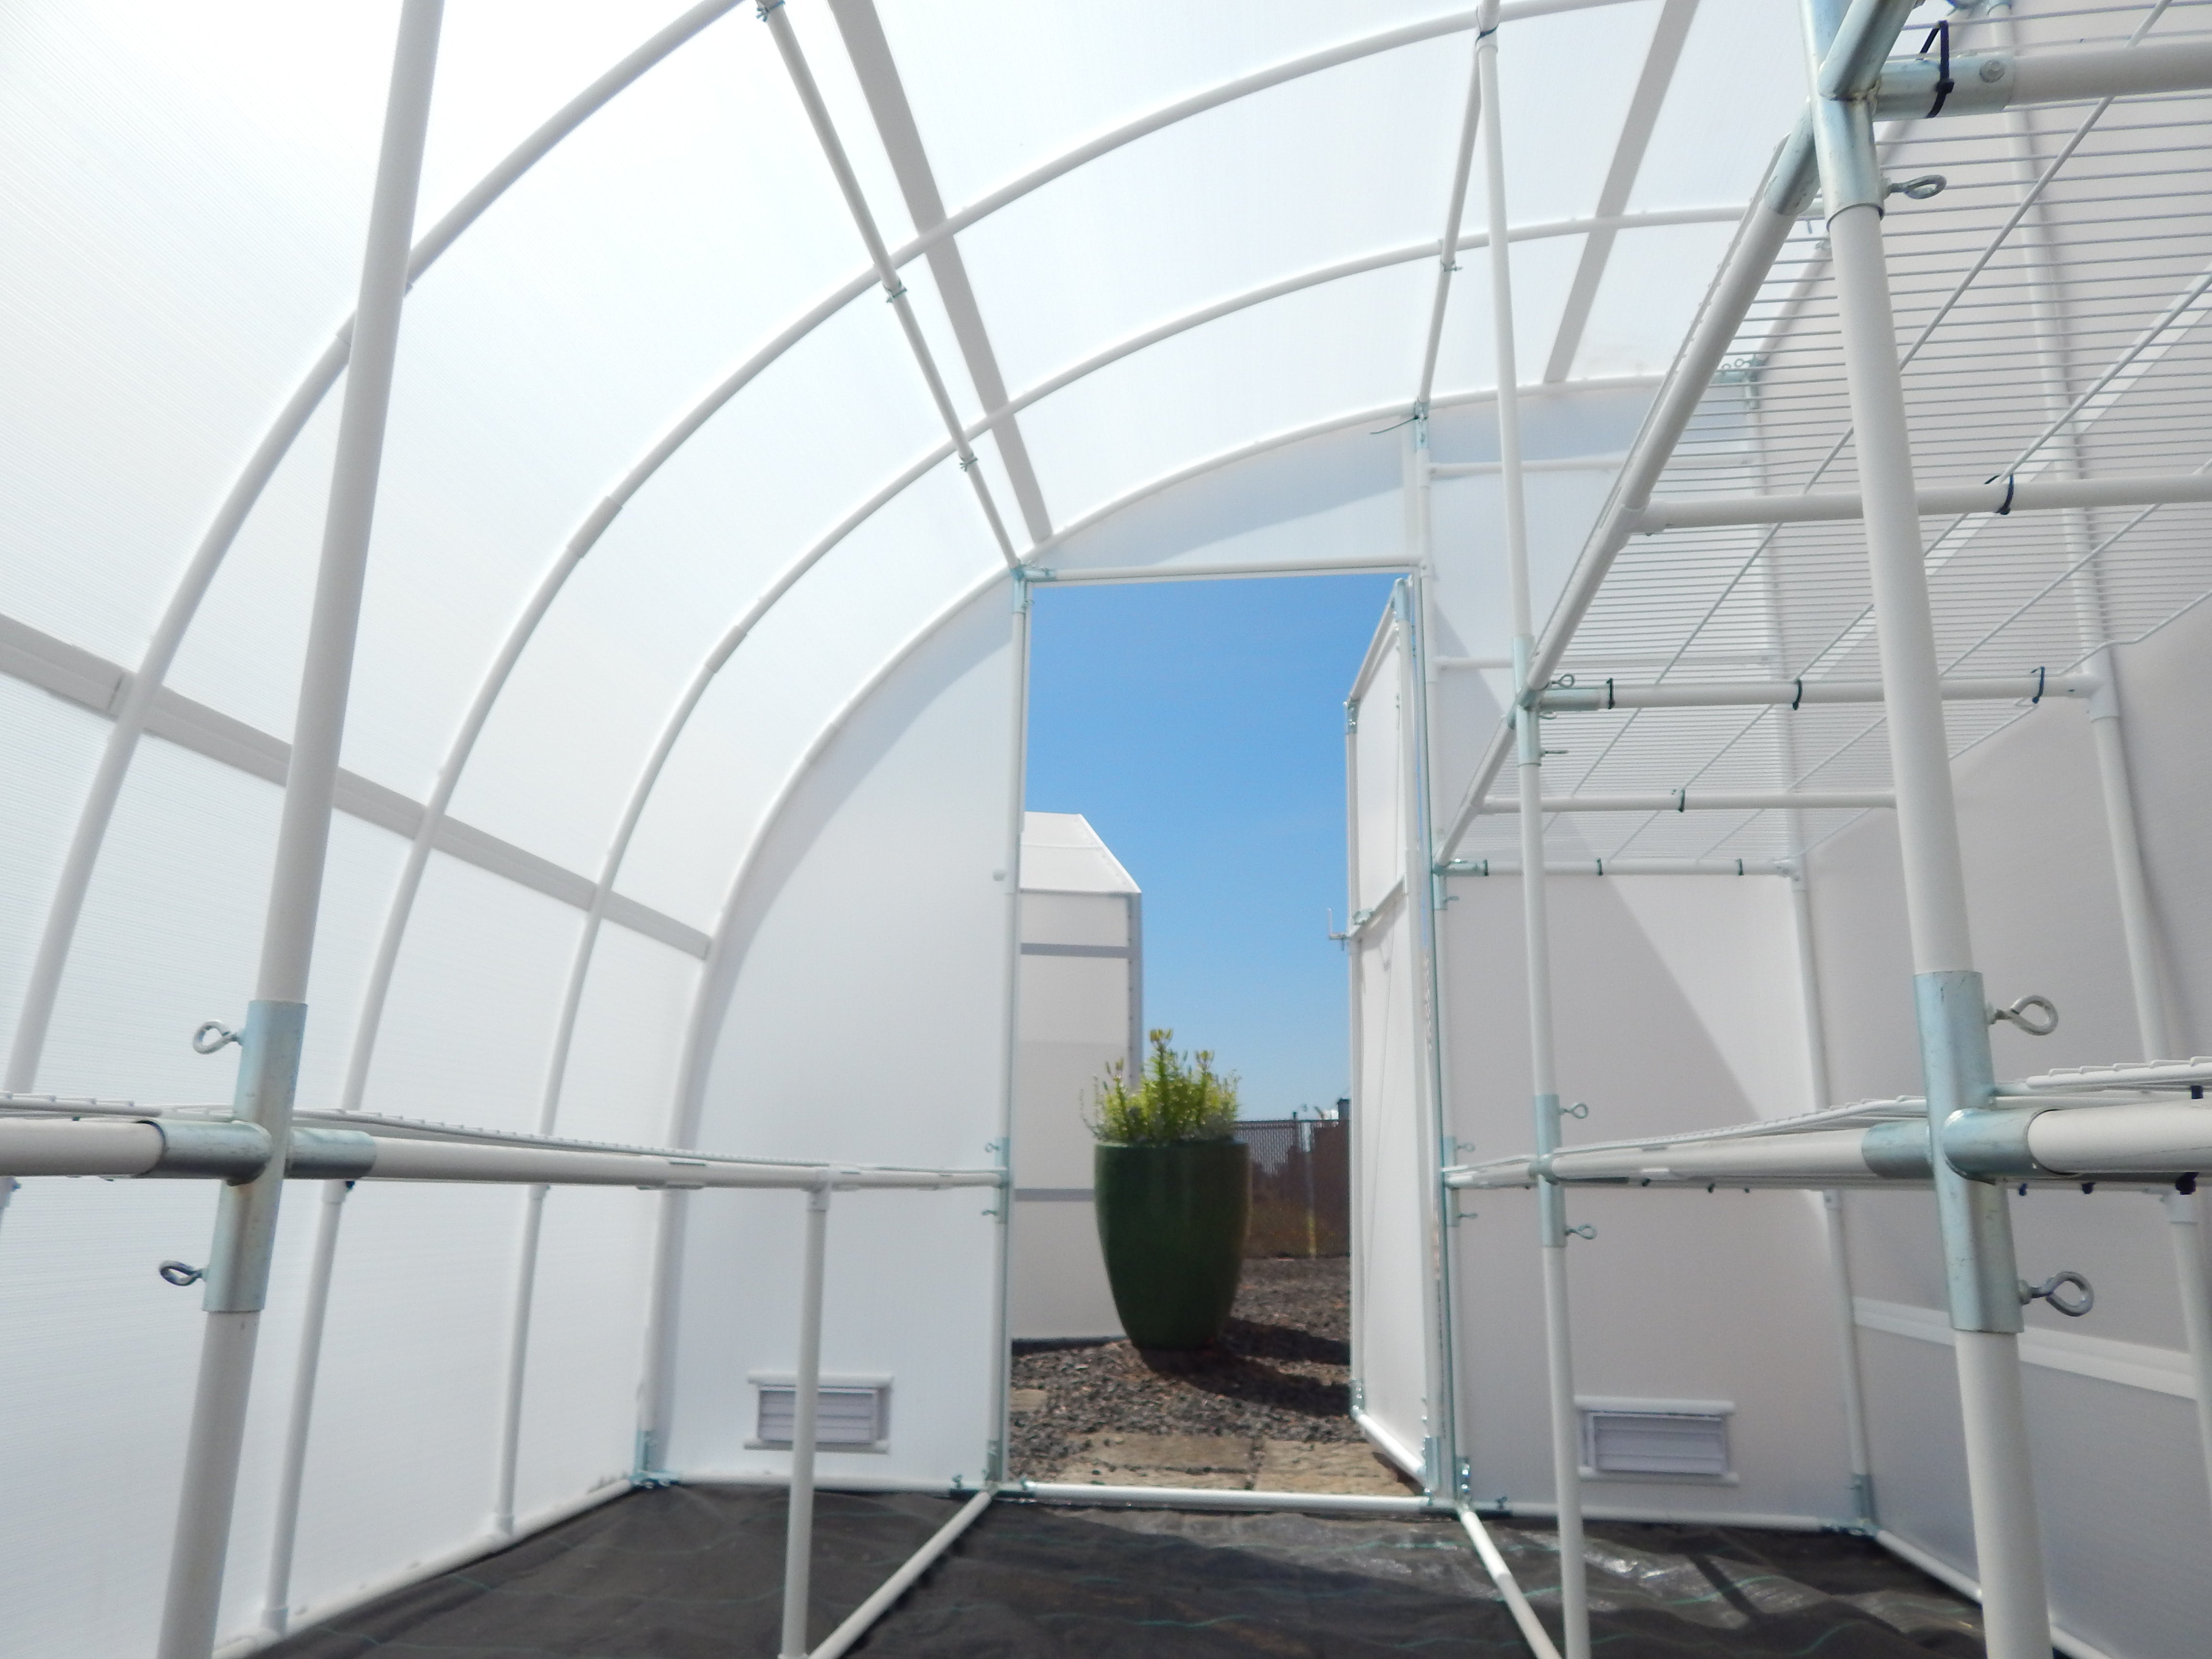 Harvester™ 8x8x12 ft. Lean-to Heat Efficient Greenhouse - Dive To Garden